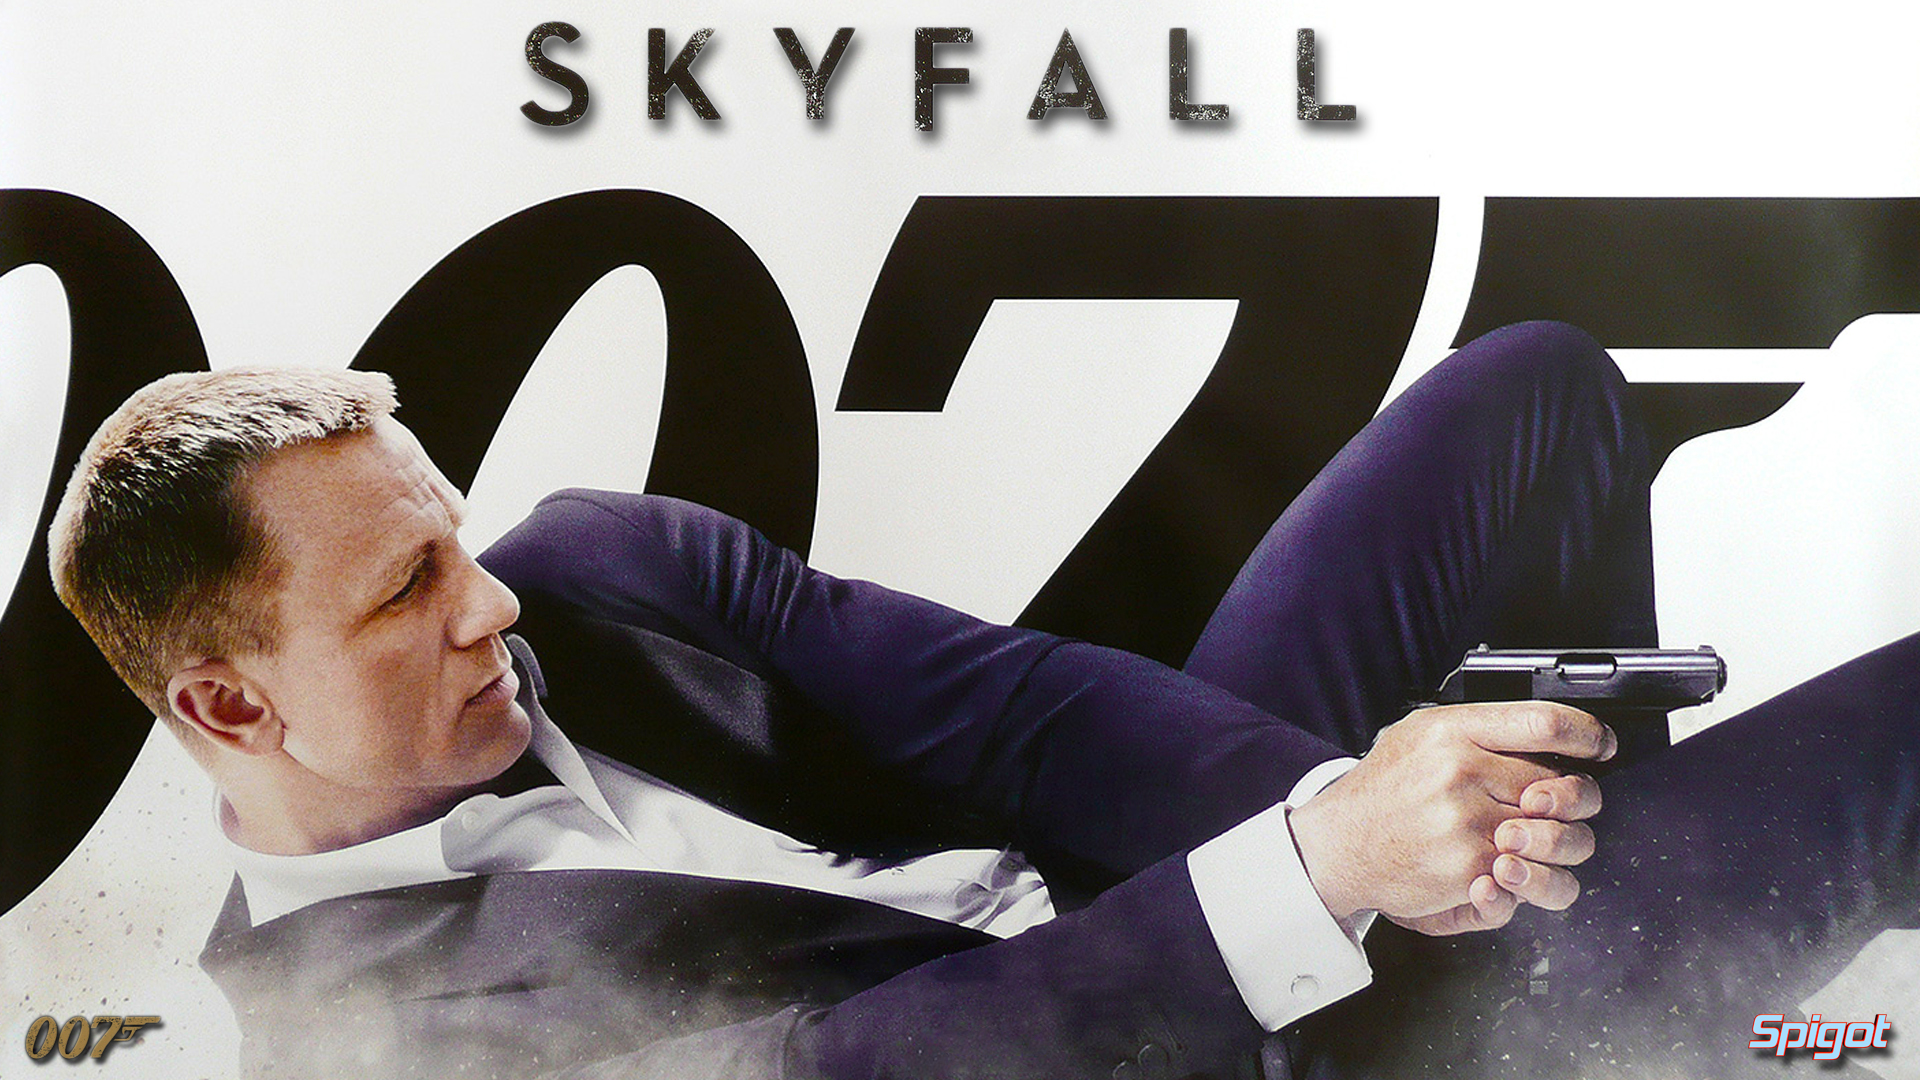 Awesome Skyfall Wallpaper Trailer And Res